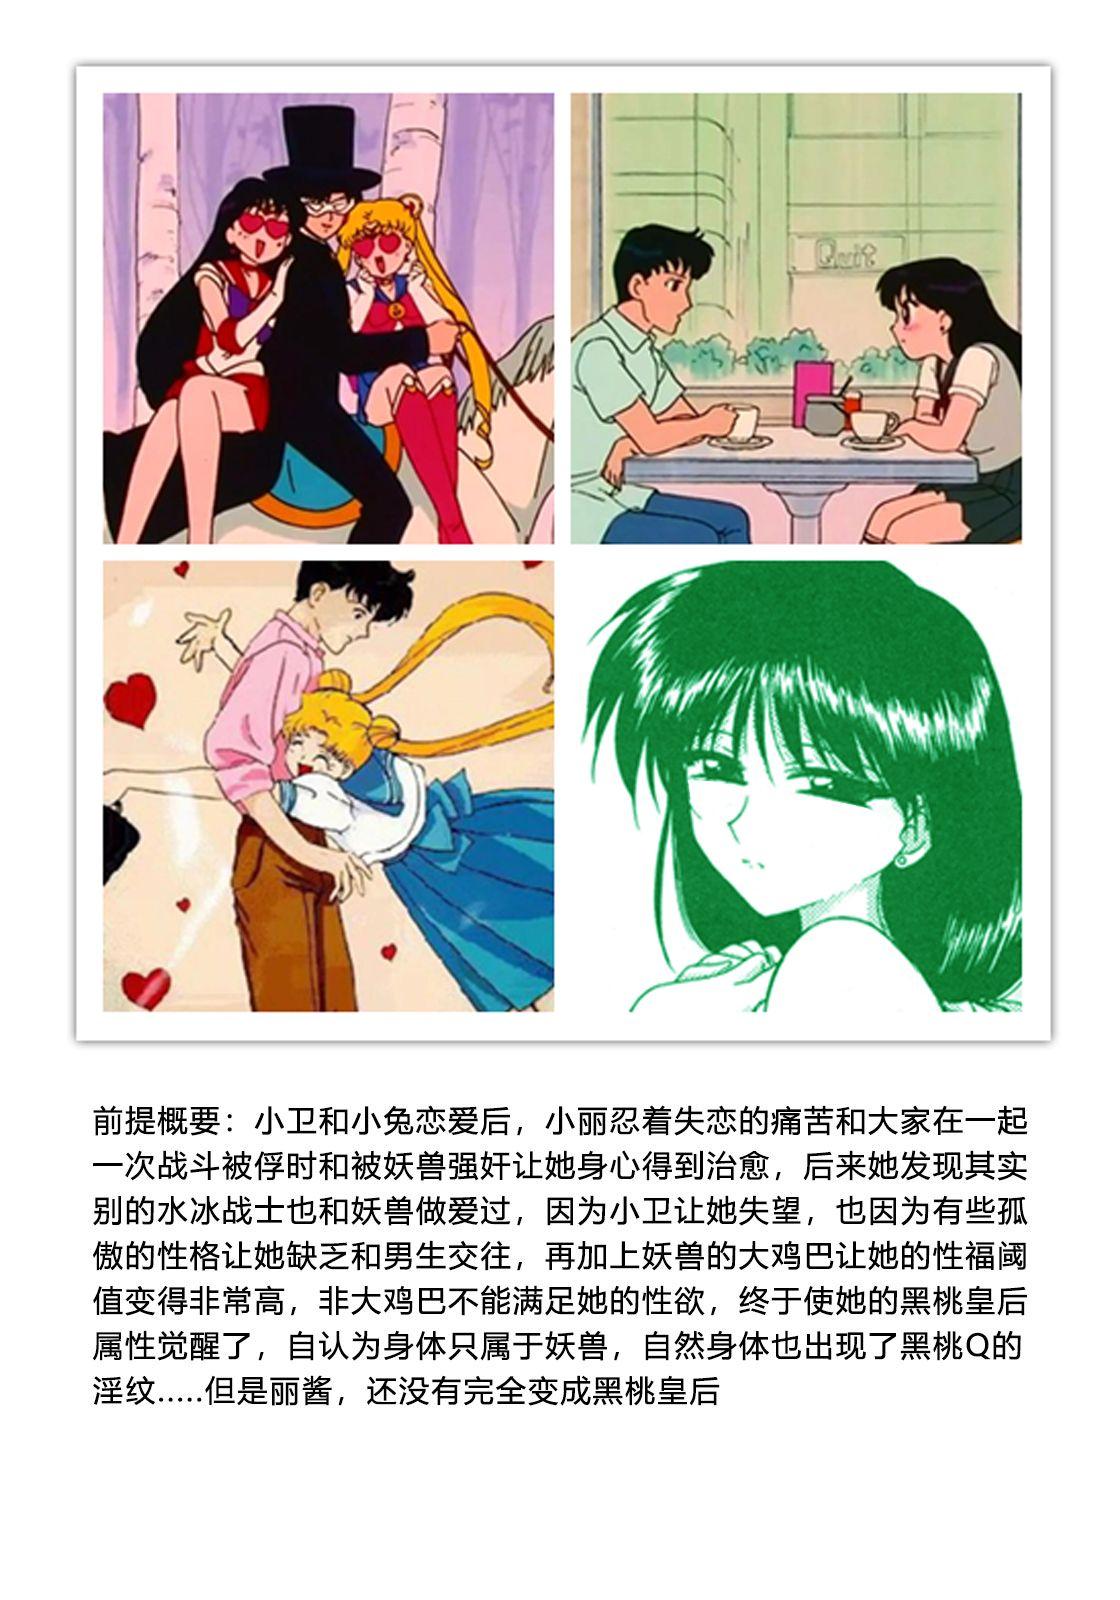 Man QUEEN OF SPADES - 黑桃皇后 - Sailor moon College - Page 12